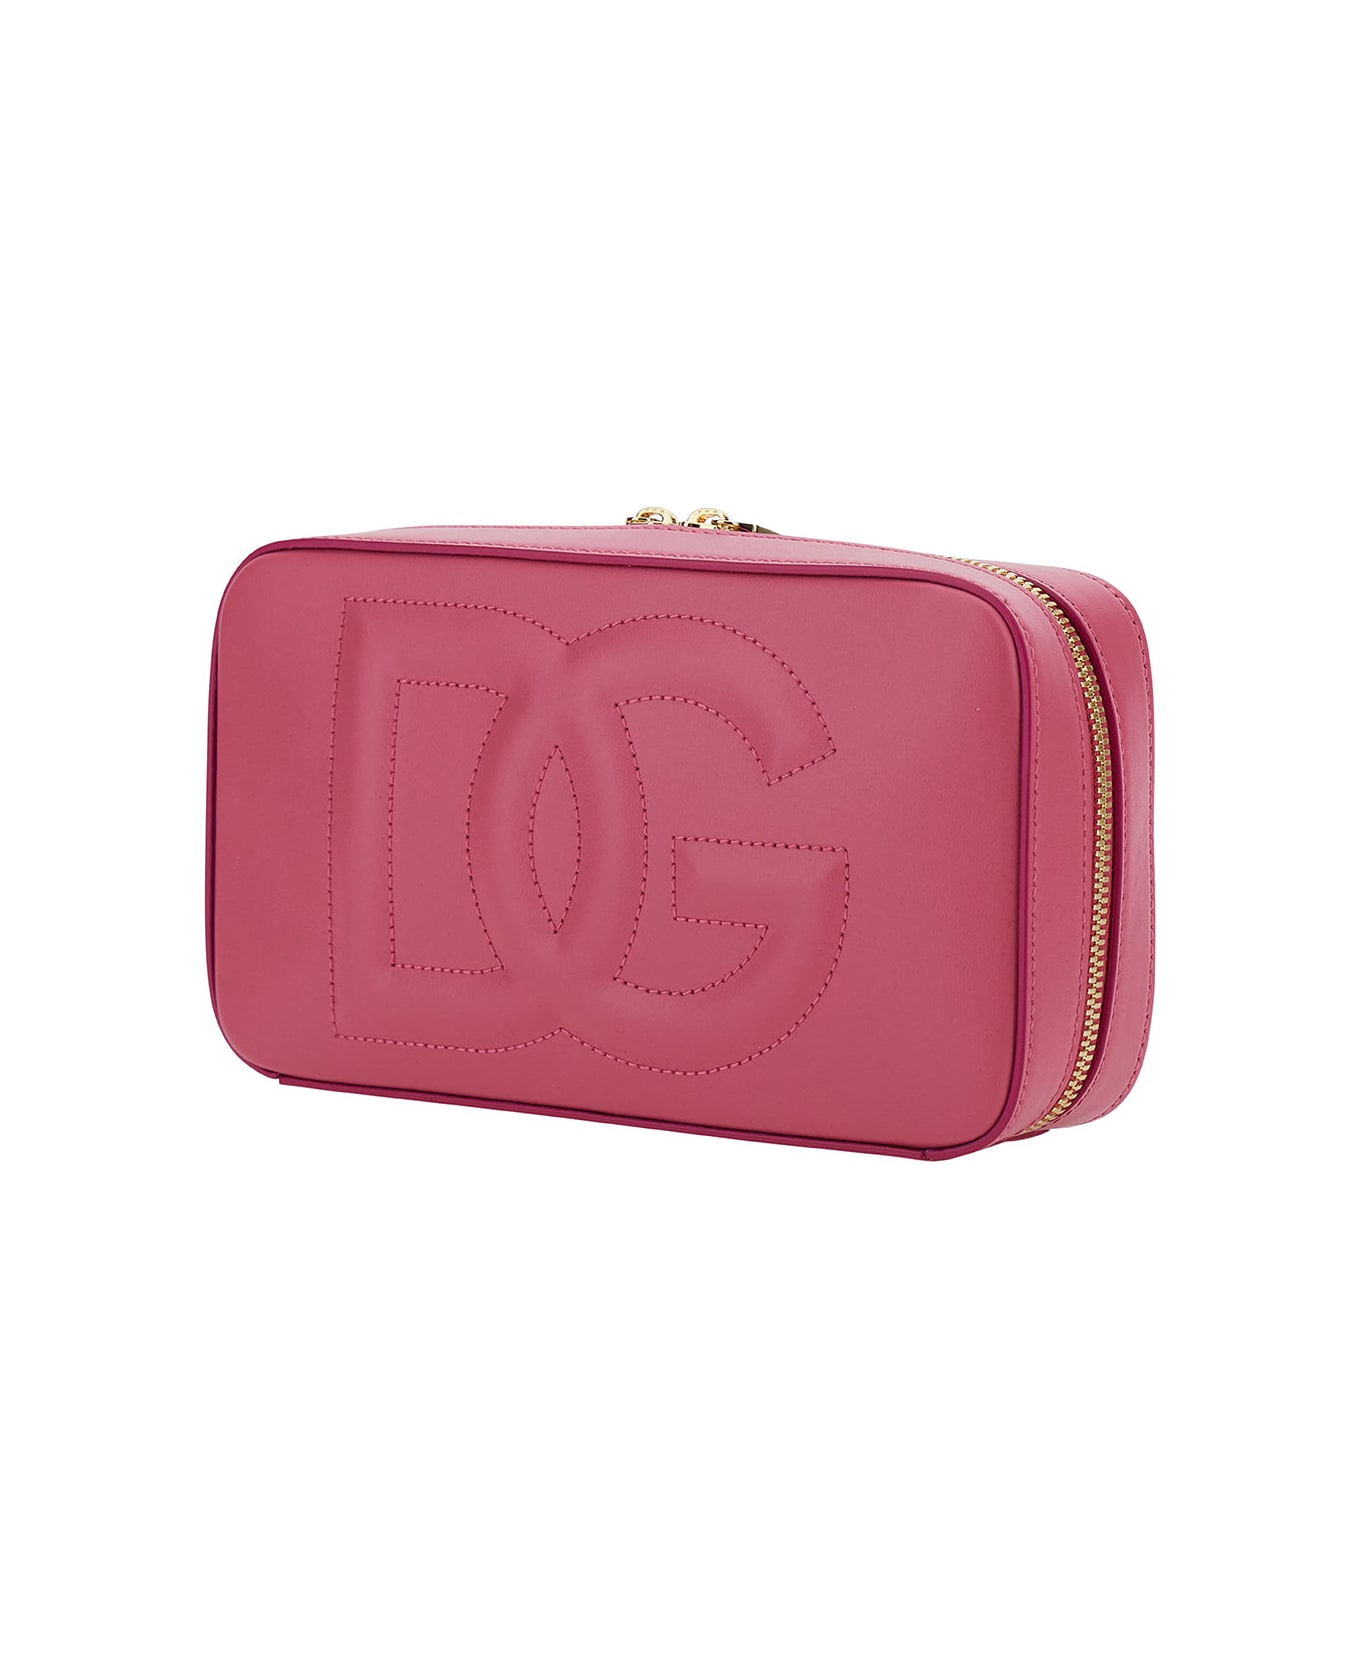 Dolce & Gabbana Pink Shoulder Bag With Quilted Dg Logo In Leather Woman - Pink